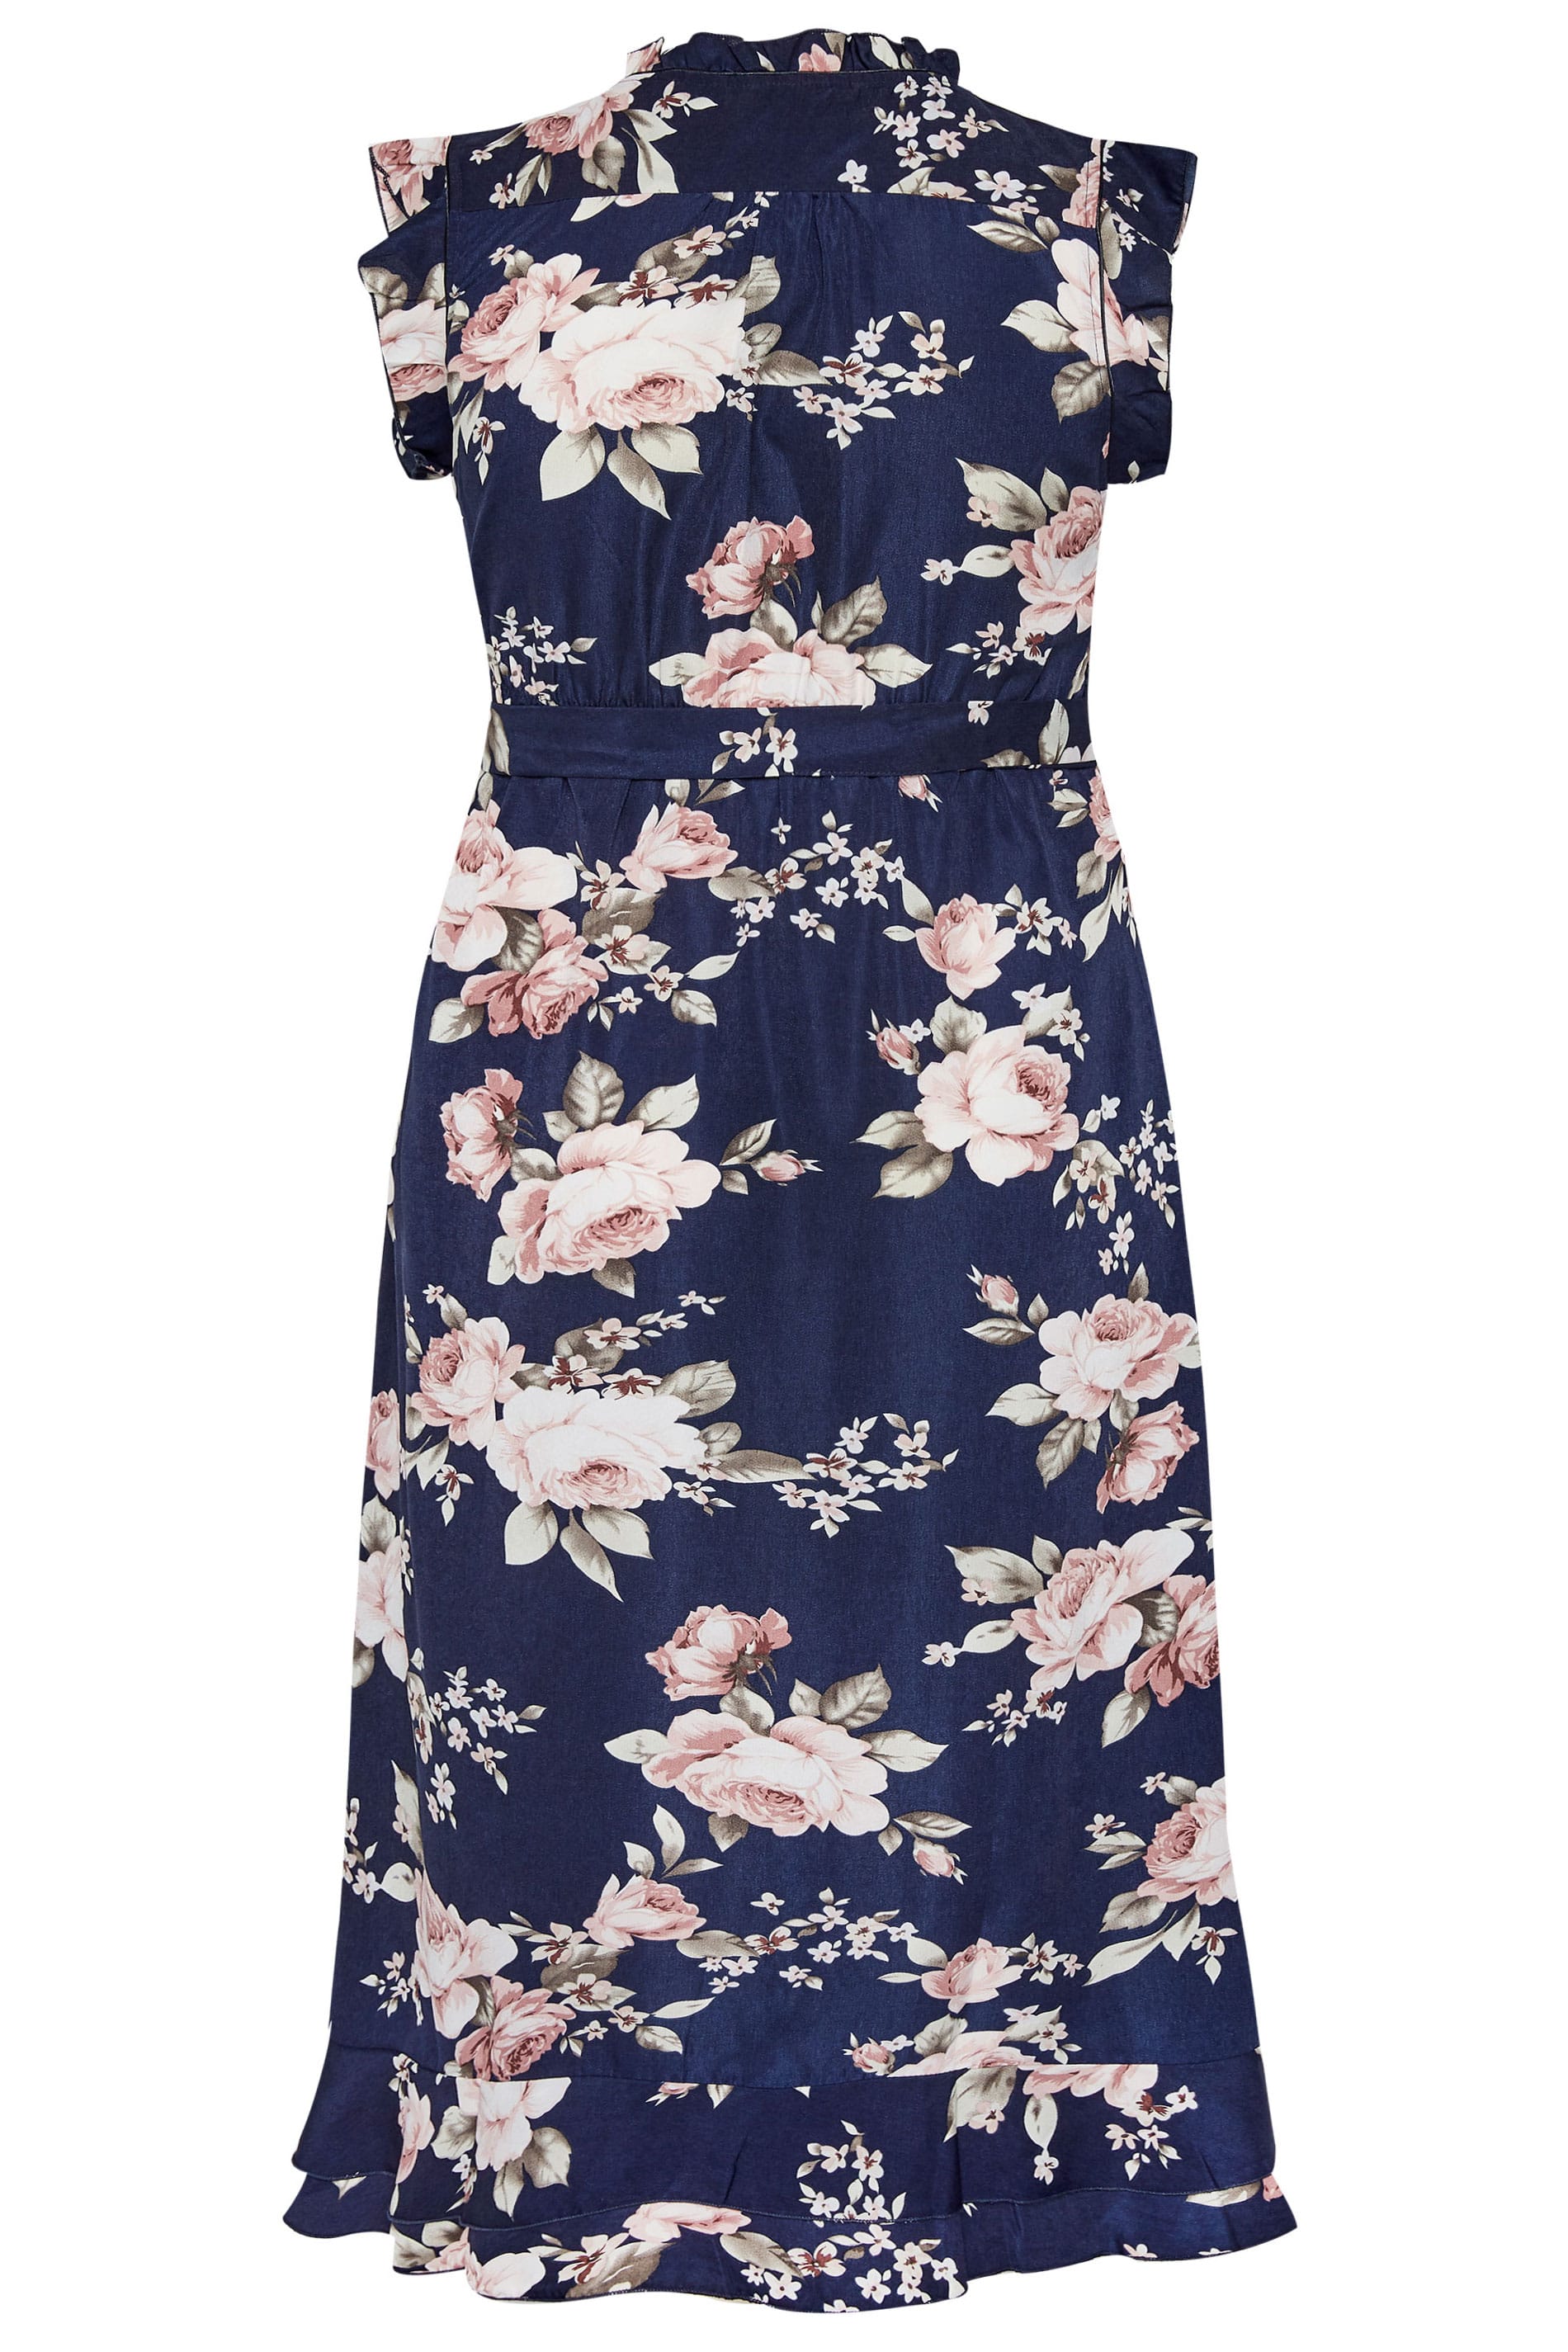 IZABEL CURVE Navy Floral Maxi Dress | Plus Sizes 16 to 26 | Yours Clothing